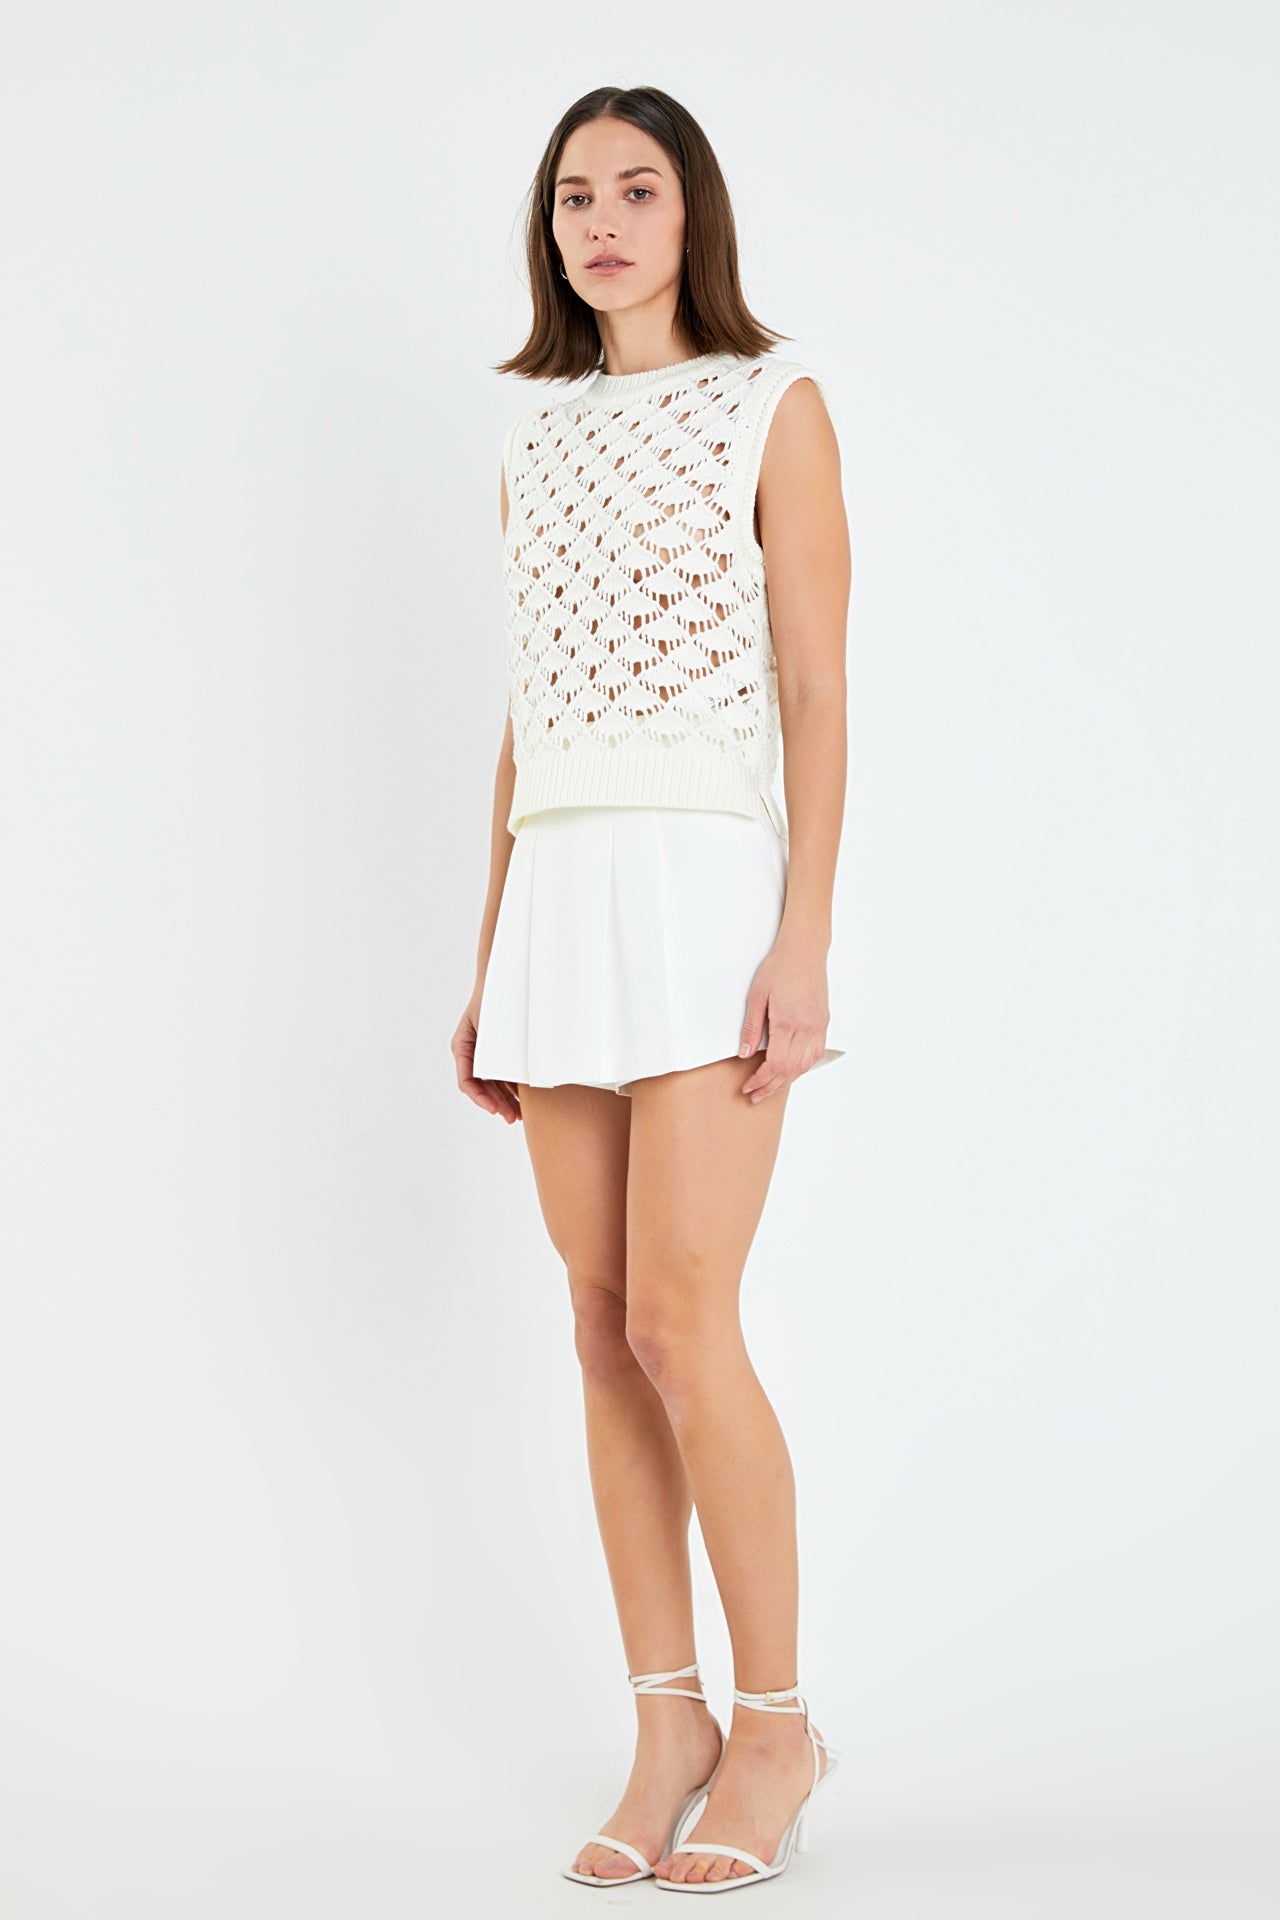 ENGLISH FACTORY - Crochet Vest Top - TOPS available at Objectrare